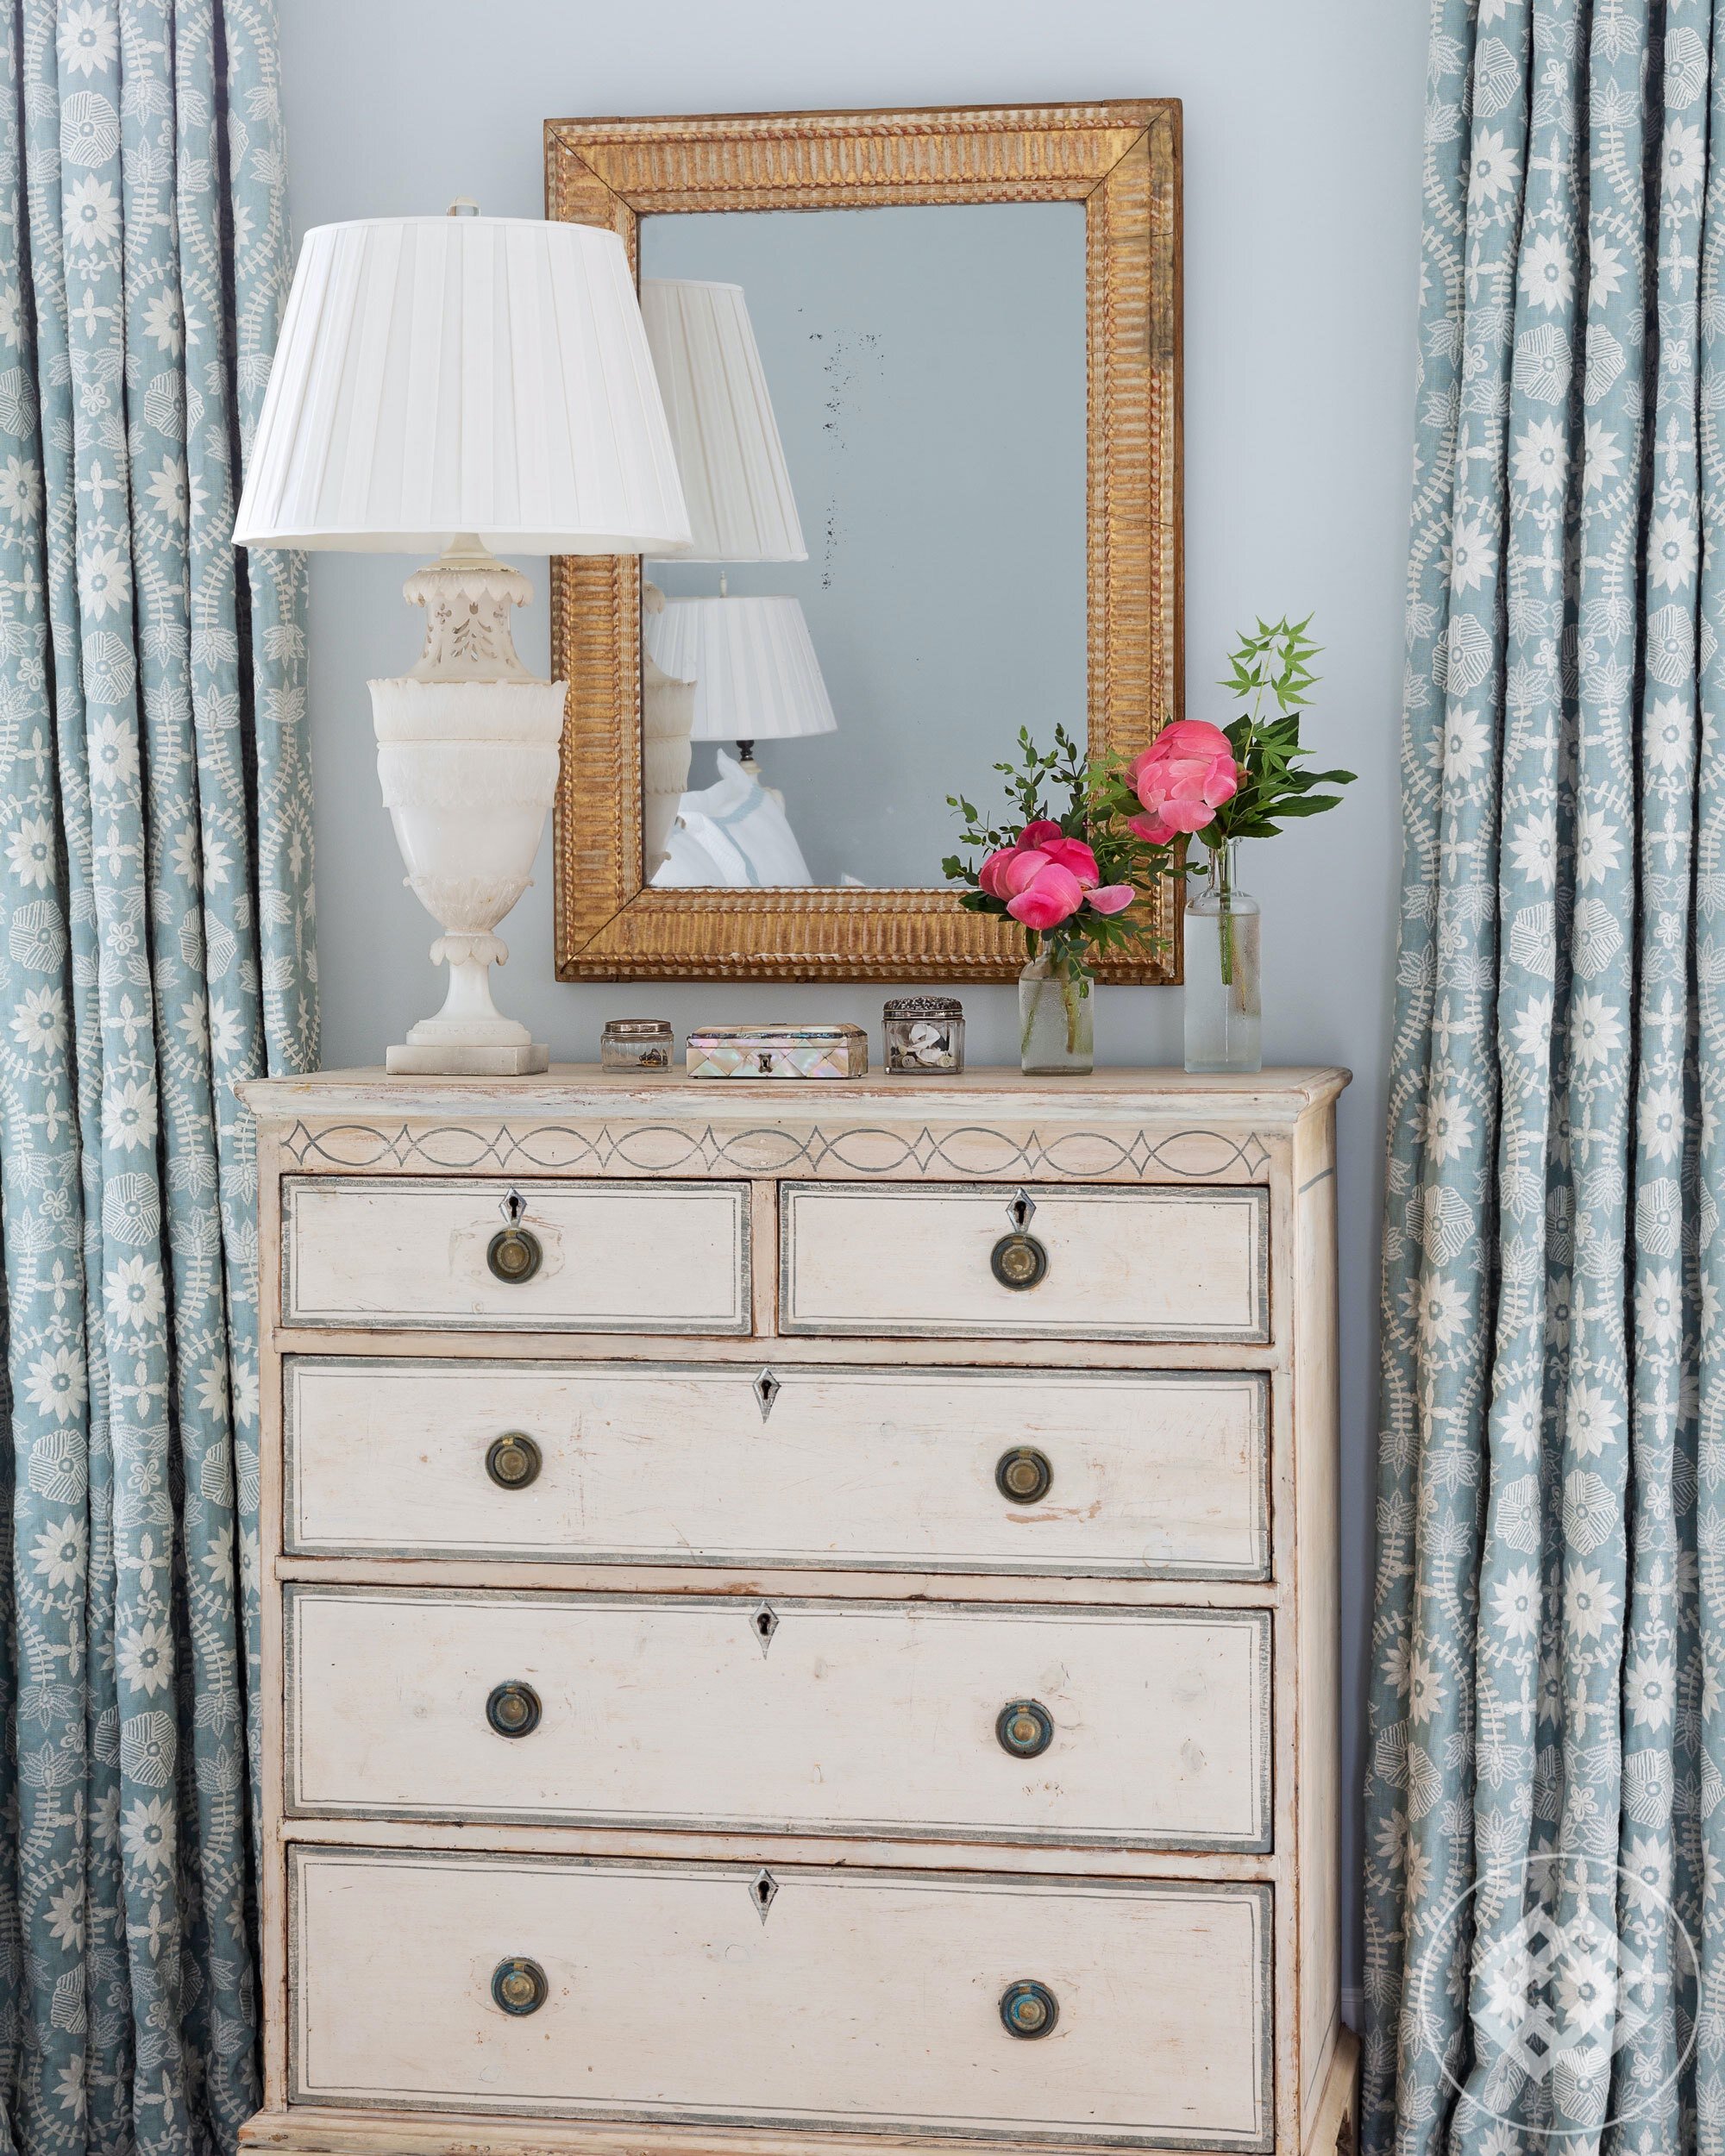 shc-19-embroidered-linen-curtains-flank-an-antique-painted-chest-of-drawers.jpg